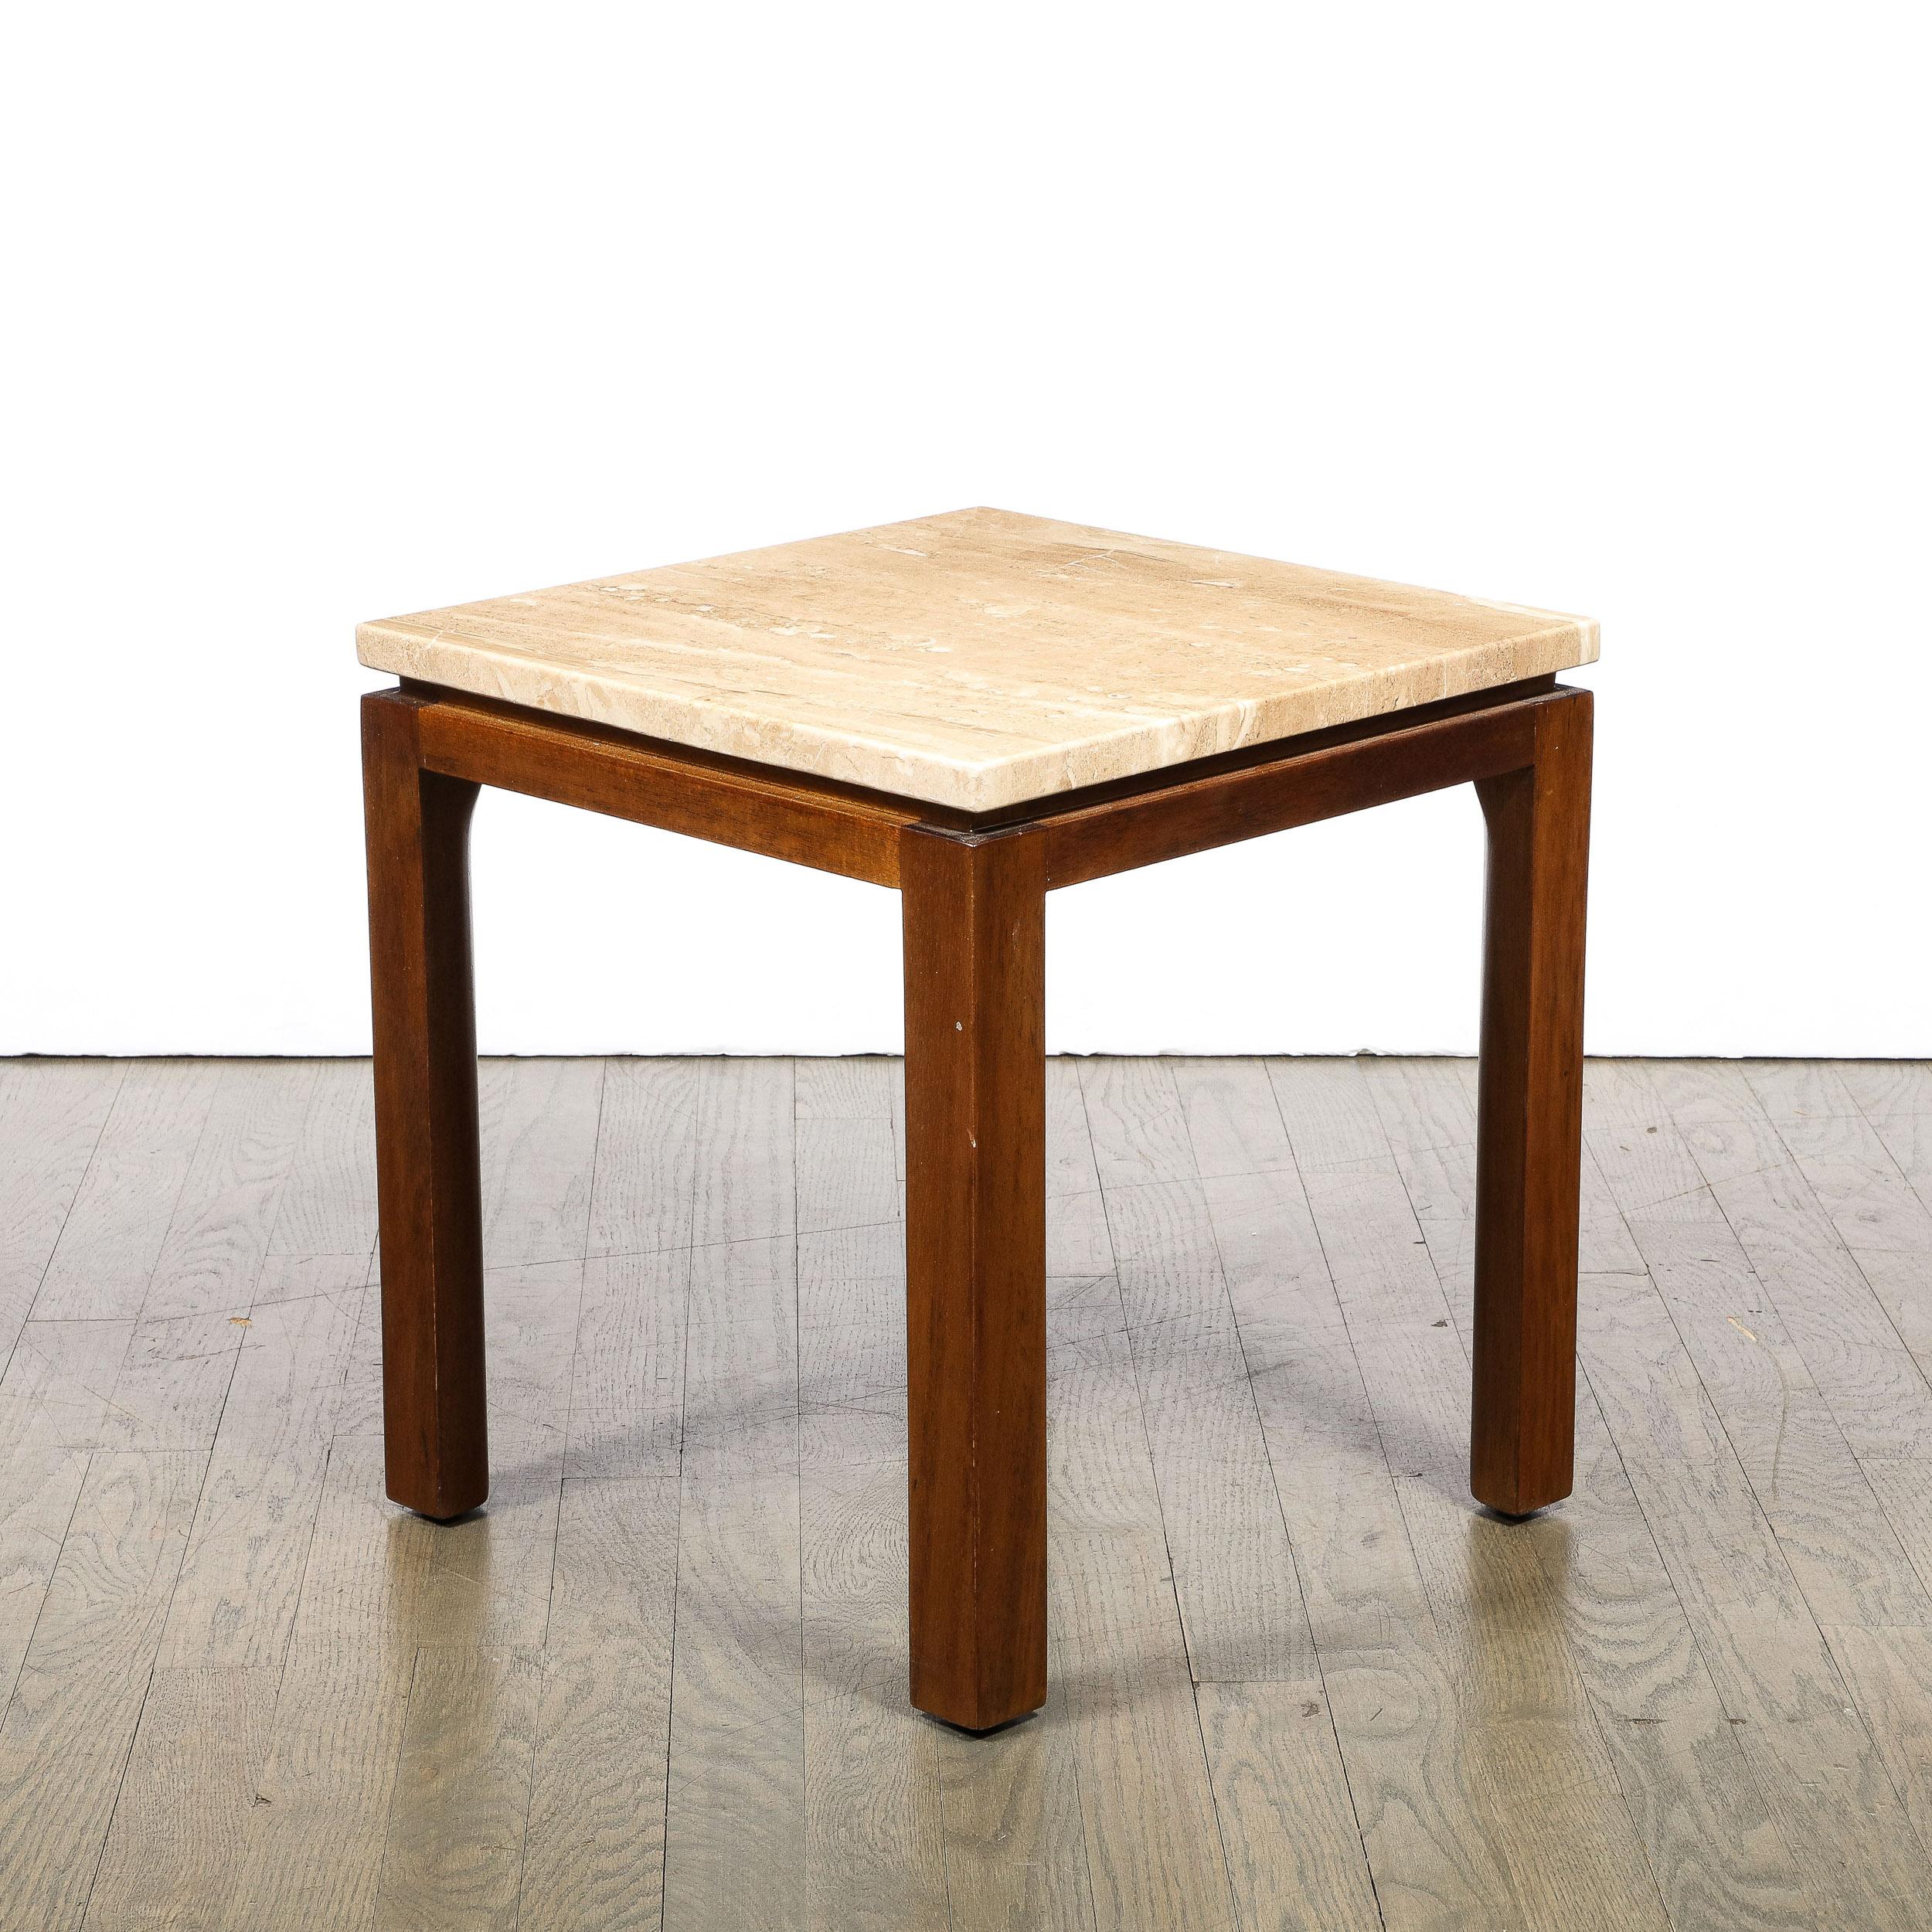 Mid-Century Modernist Side Table in Walnut & Travertine Marble by Harvey Probber In Excellent Condition For Sale In New York, NY